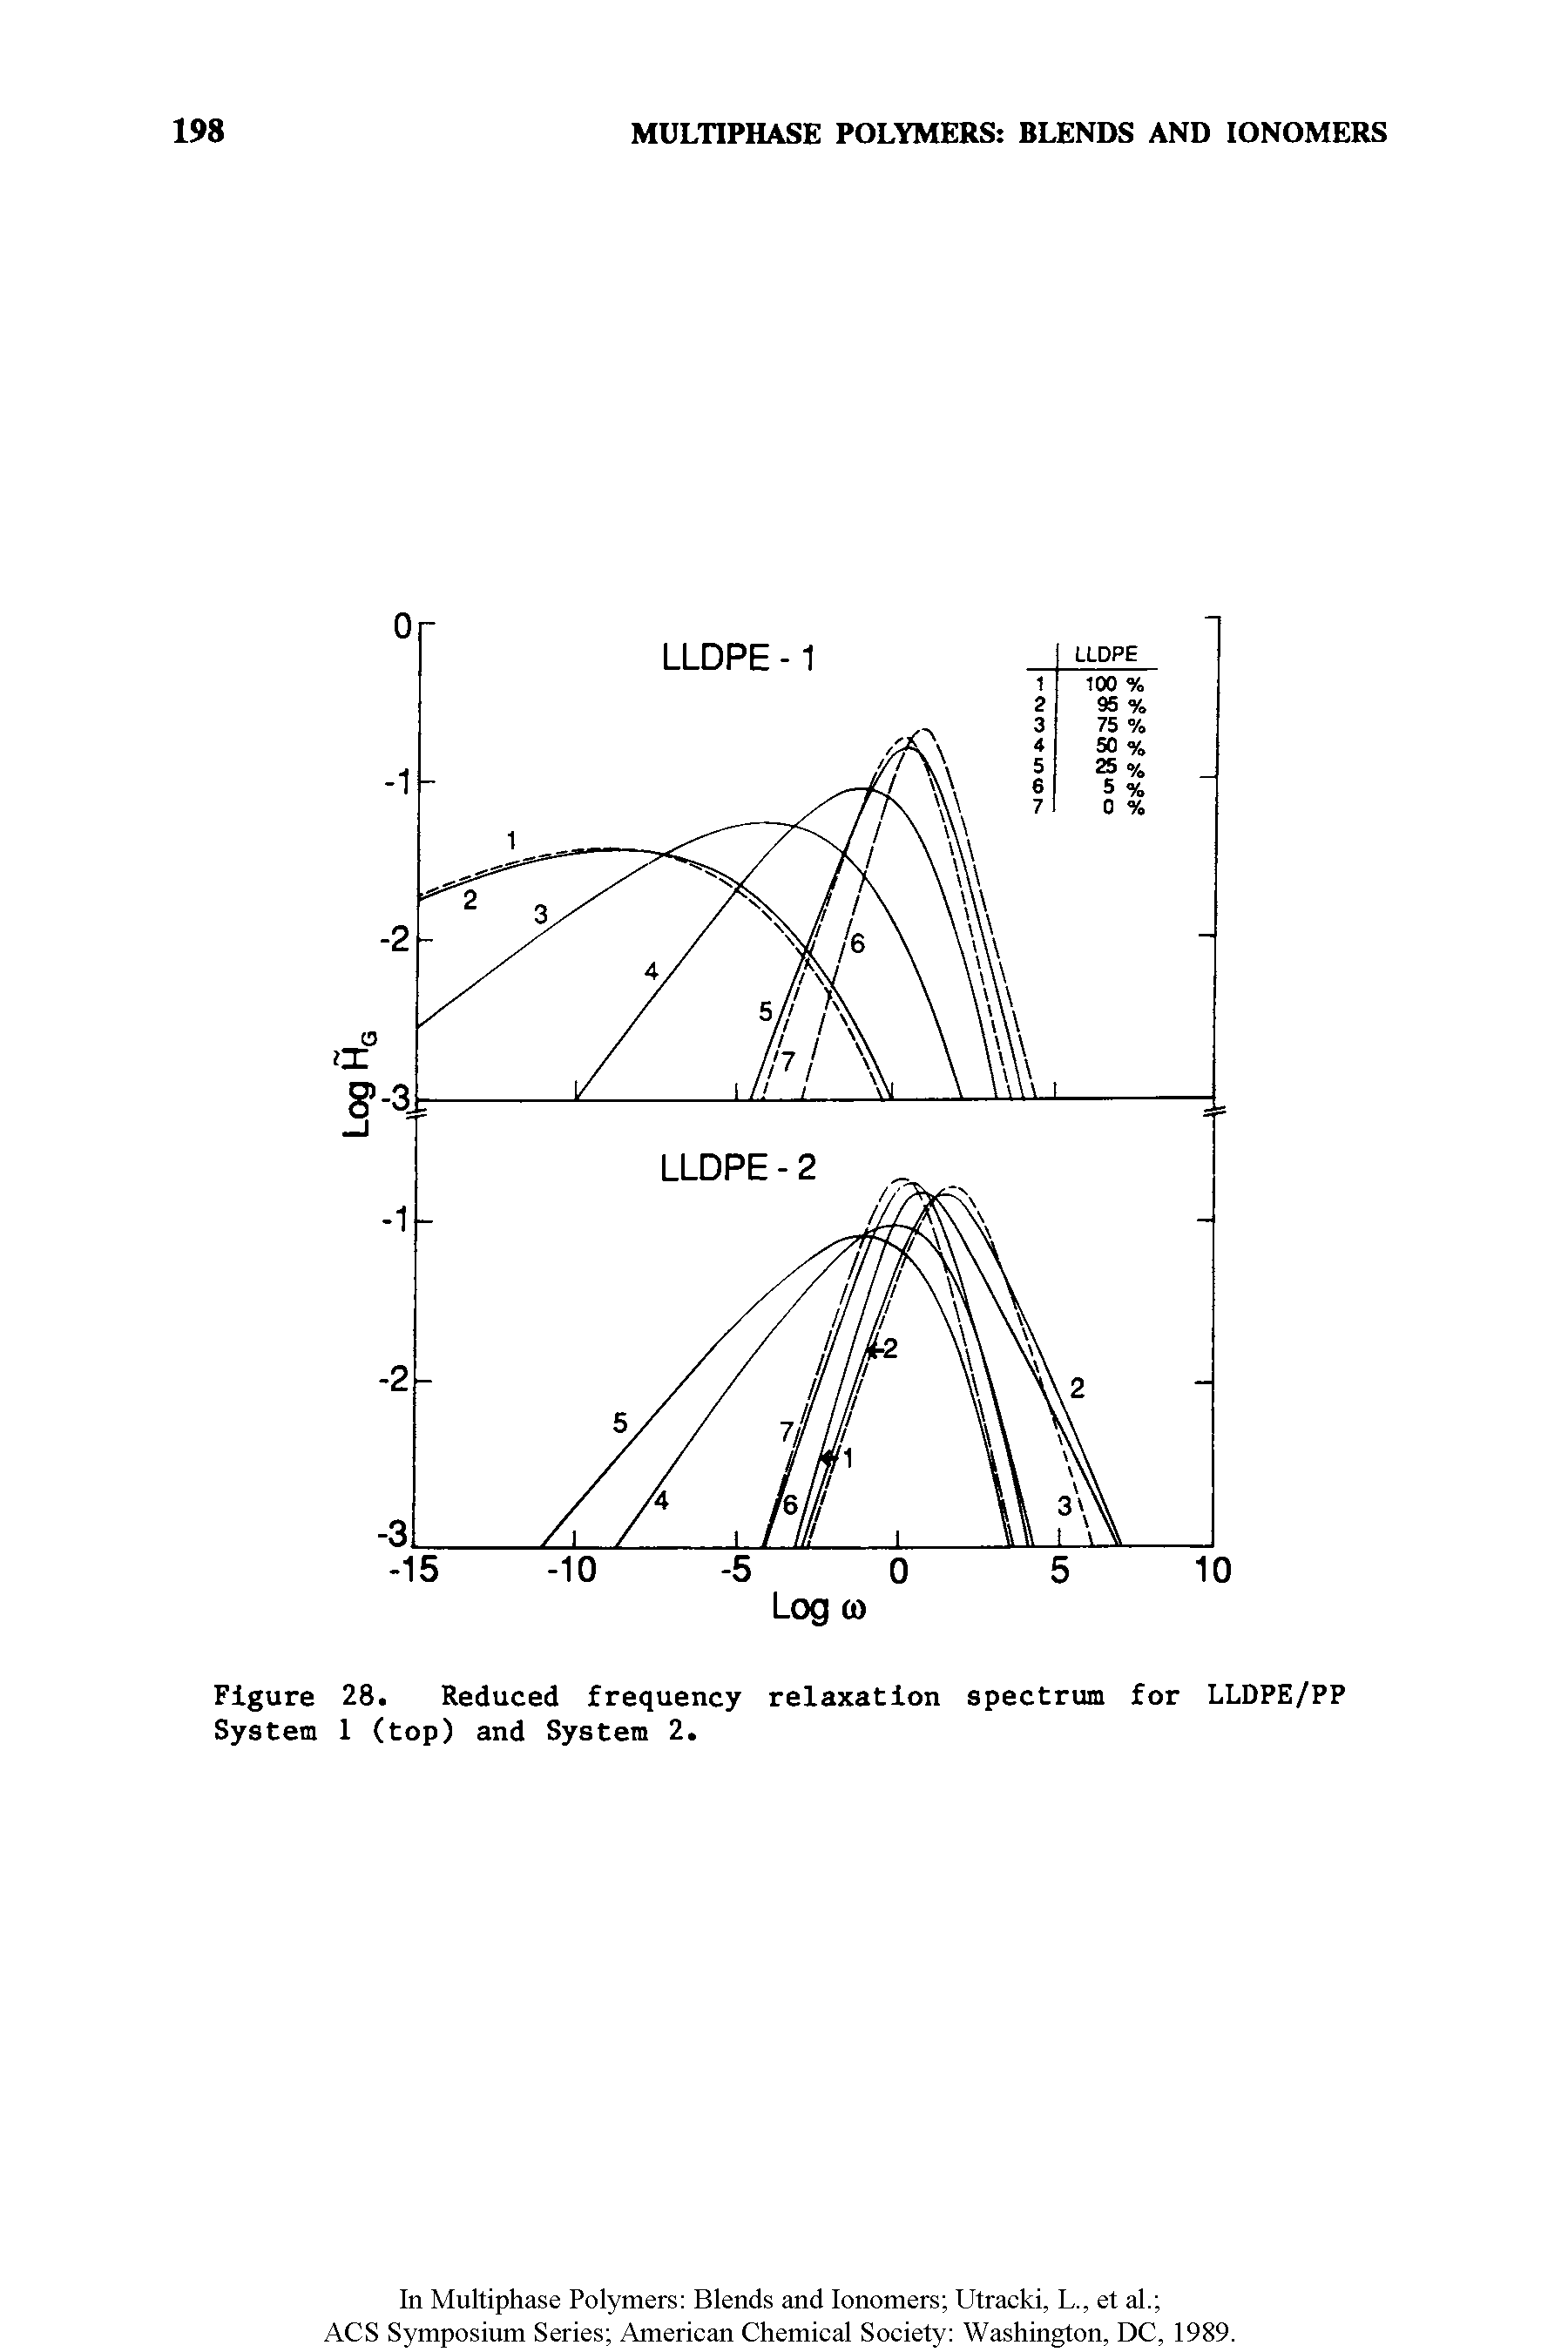 Figure 28. Reduced frequency relaxation spectrum for LLDPE/PP System 1 (top) and System 2.